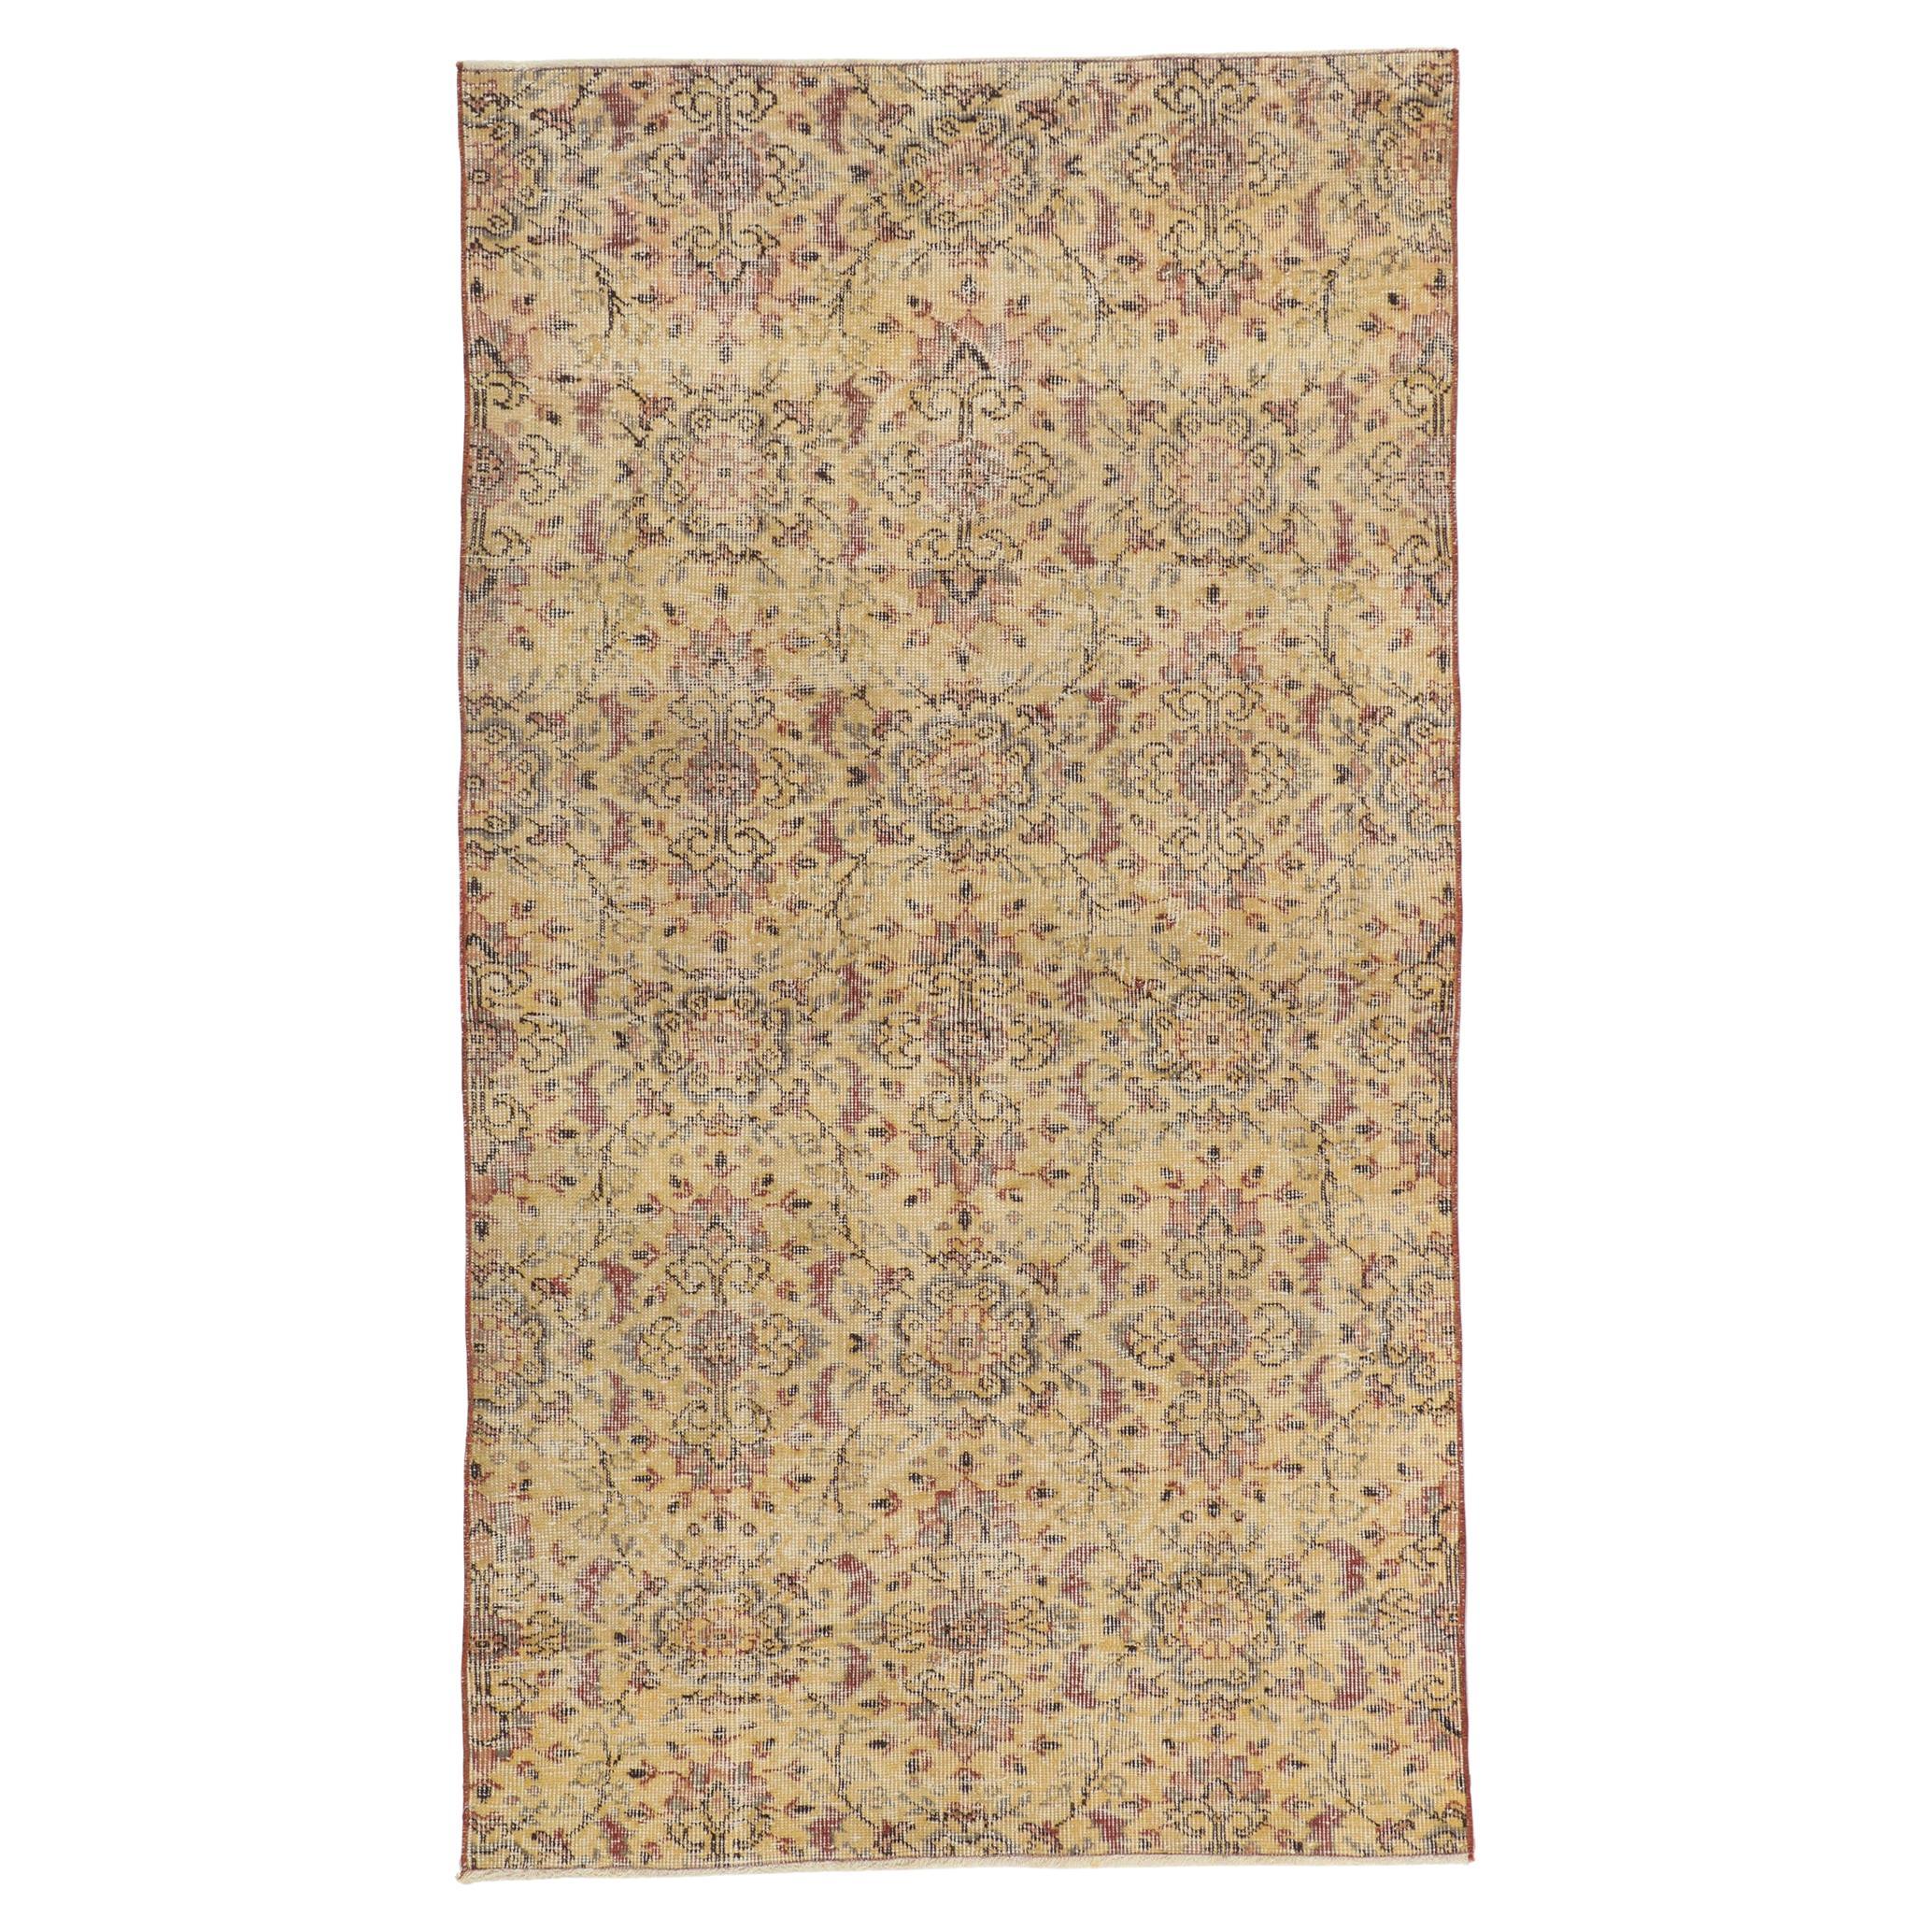 French Country Vintage Turkish Sivas Rug with Rustic Elegance